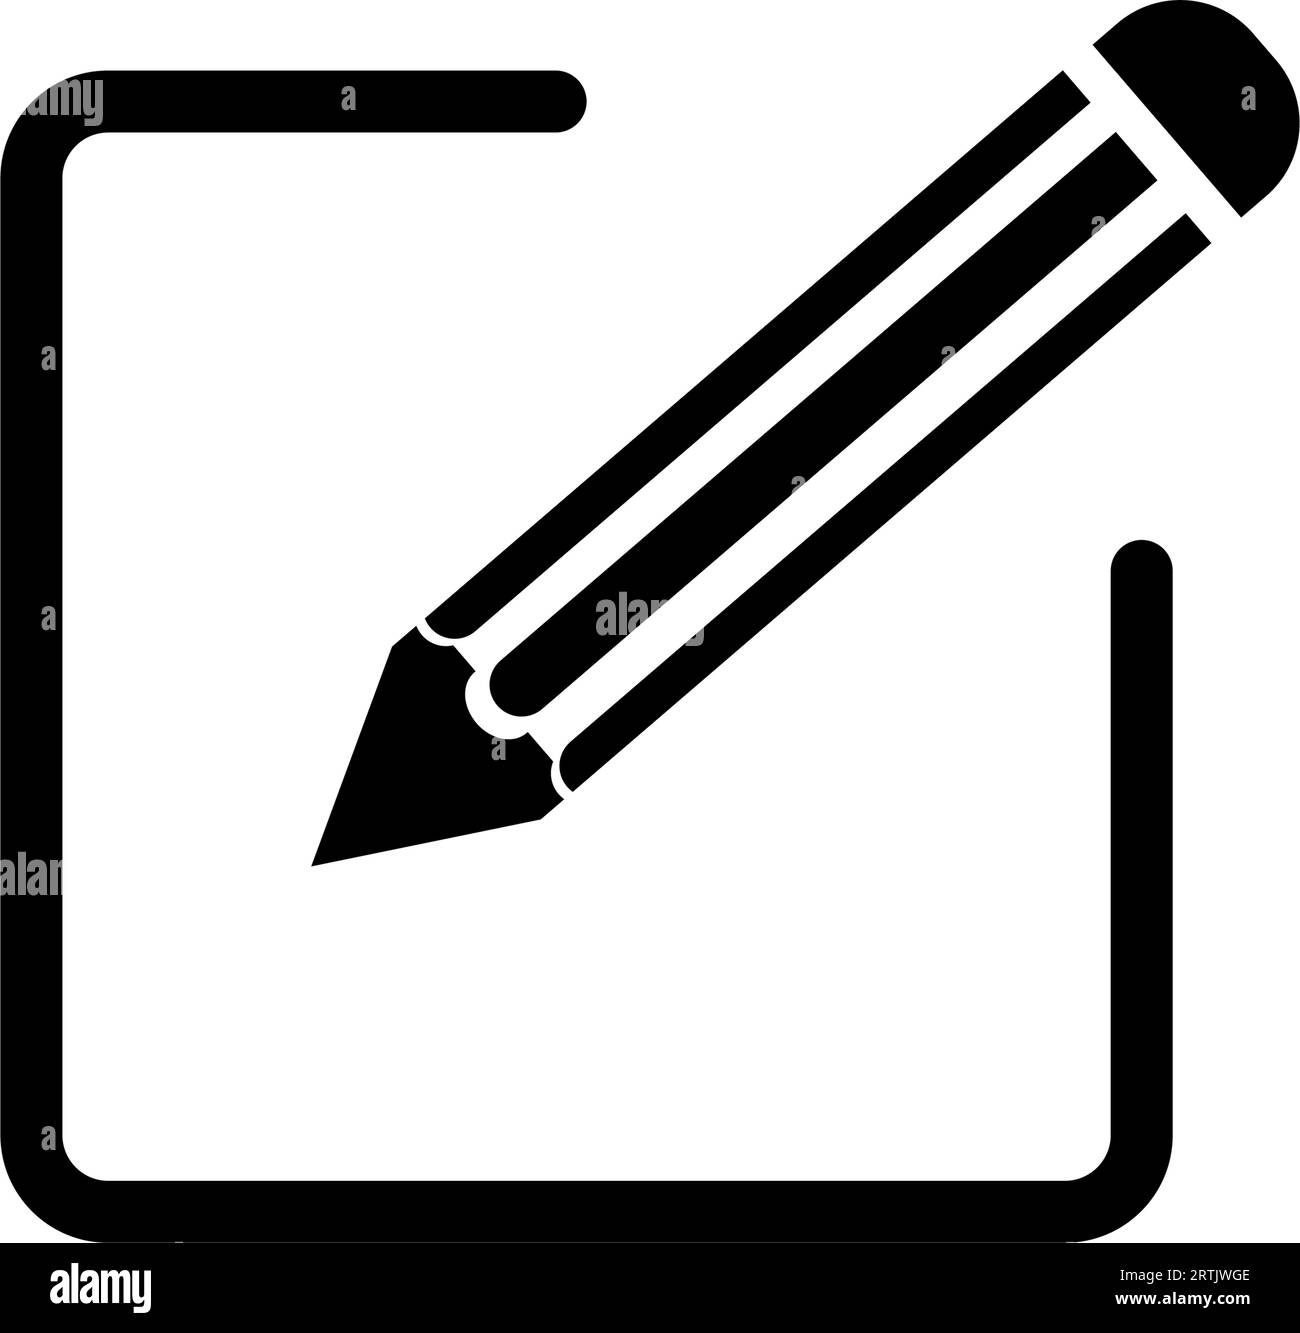 Pencil icon with Notepad Document Edit. Write icon, Pencil and Paper glyph symbol. Edit text icon and essay icon, Pencil drawing contract web symbol. Stock Vector